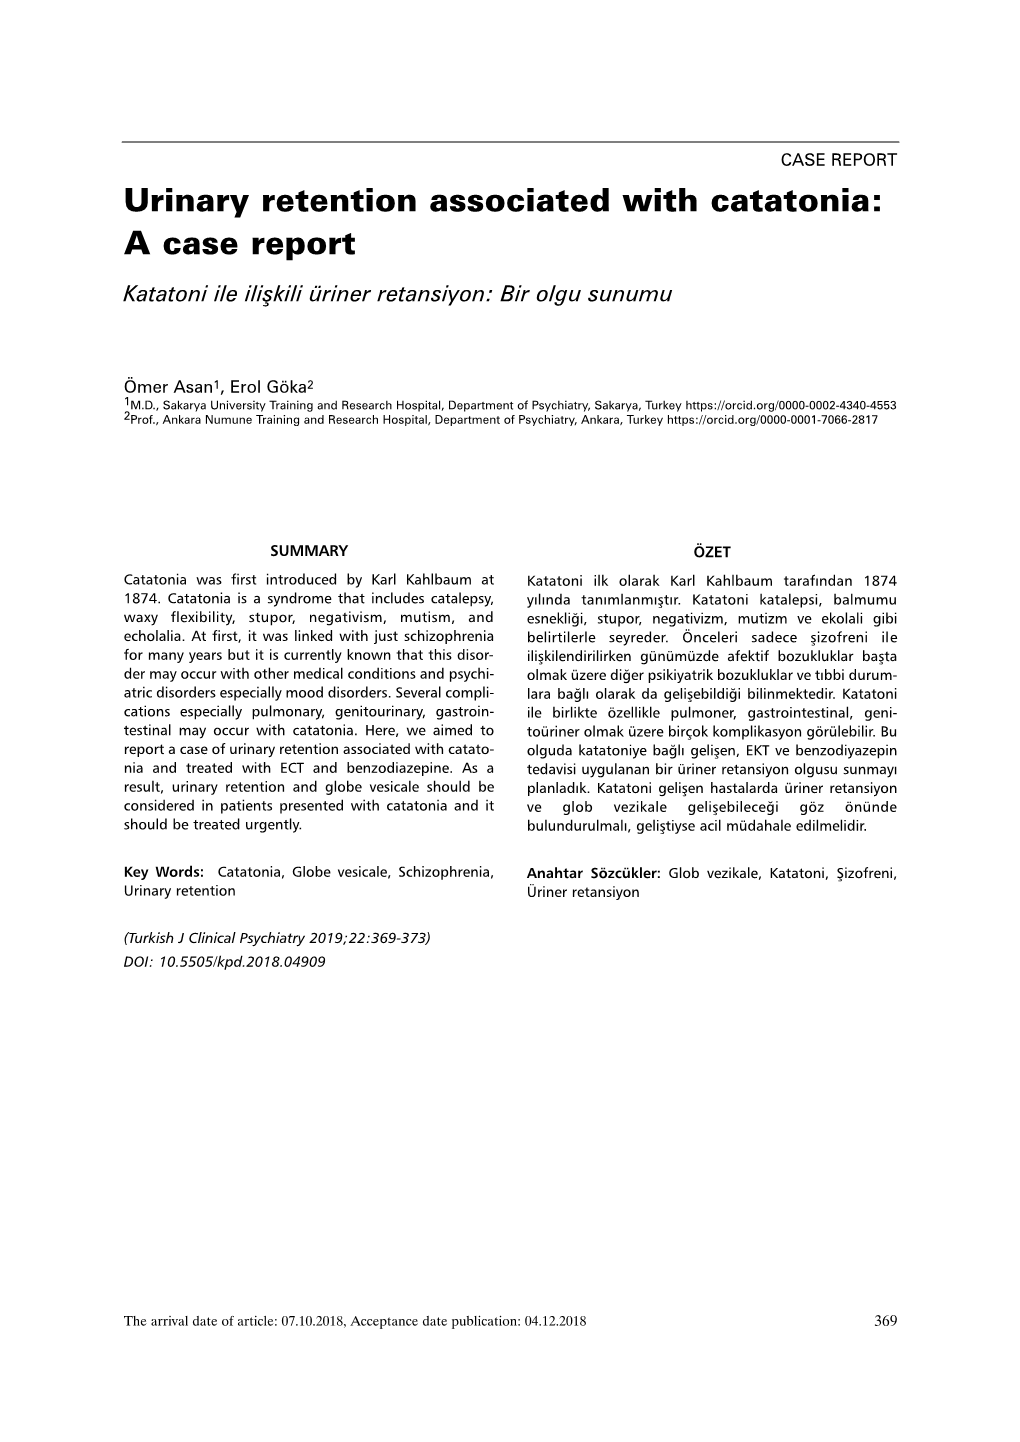 Urinary Retention Associated with Catatonia: a Case Report